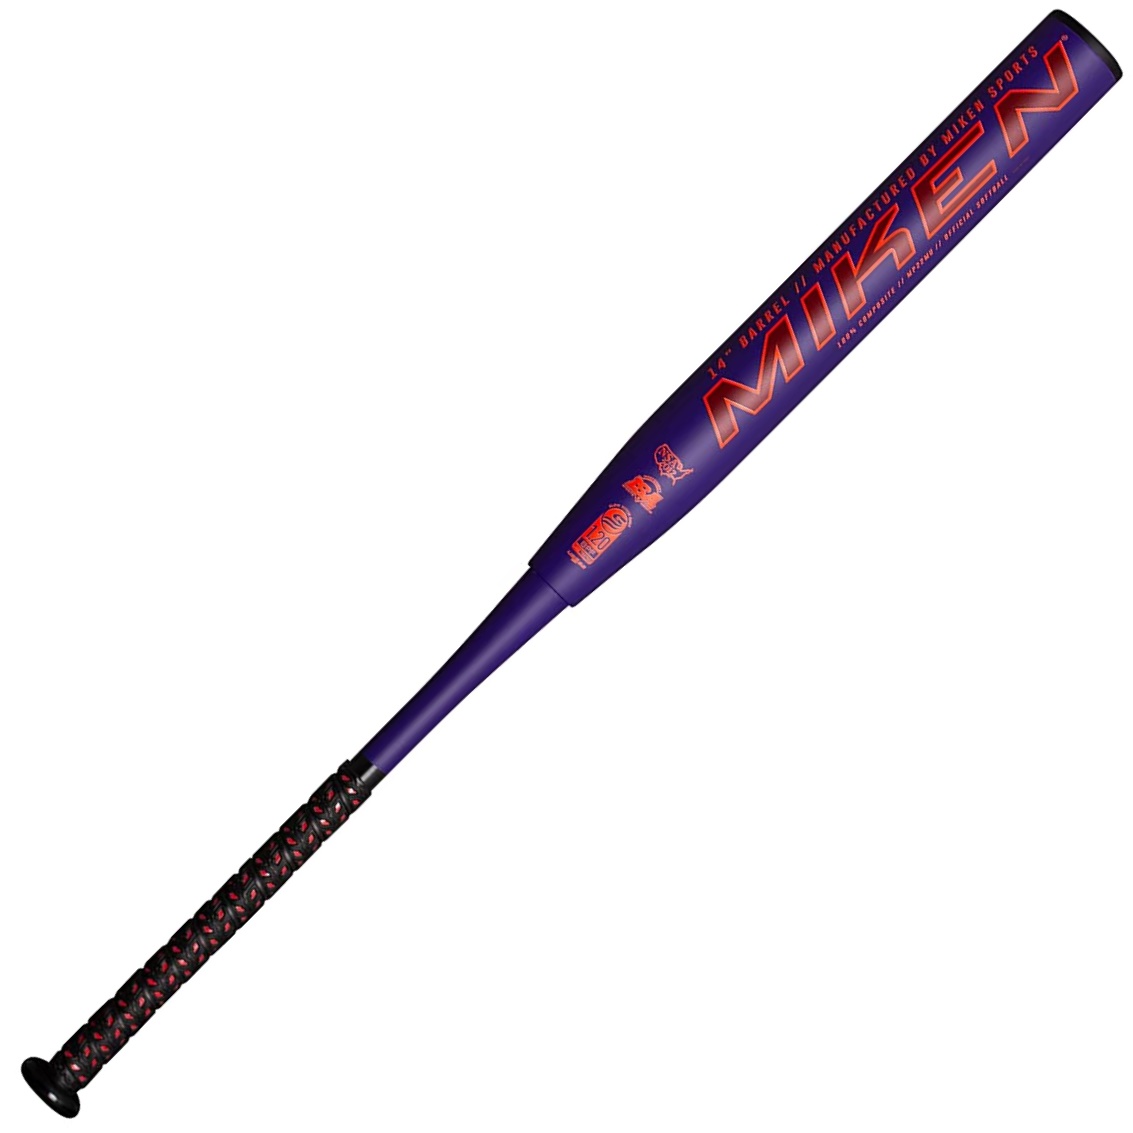 Miken Freak Primo Maxload USSSA Slowpitch Softall Bat  The Miken Freak Primo Maxload slow pitch softball bat is a top-of-the-line piece of equipment for serious softball players. With a barrel diameter of 2 1/4 inches and a barrel length of 14 inches, this bat is designed to deliver a slightly end-loaded swing feel, thanks to Miken's 1/2 Ounce Maxload. The two-piece, all-composite design is certified by USSSA (New NTS Tested | 240 Compression), NSA, and ISA, ensuring that it meets the highest standards for performance and quality. The bat comes in a bold purple and red colorway. The C4 Carbon Fiber technology used in the bat's construction allows for the most efficient angling of composite fibers on the barrel, resulting in unmatched performance and consistency on softballs coming off the barrel. The E-Flex 360 Barrel design works in conjunction with the C4 Carbon Fiber to ensure flex, performance, and durability on all 360 degrees of the barrel face. The F4P Energy Transfer technology improves energy transfer from the handle to the barrel, resulting in top performance and barrel flex. The A1 Knob on the bat features a smaller knob shape that increases comfort and allows a batter's bottom finger[s] to lay over or under the knob for increased leverage when swinging the bat. This slow pitch bat comes with a full twelve (12) month manufacturer's warranty, and players are advised to save the serial sticker that comes with the bat to keep the warranty intact.